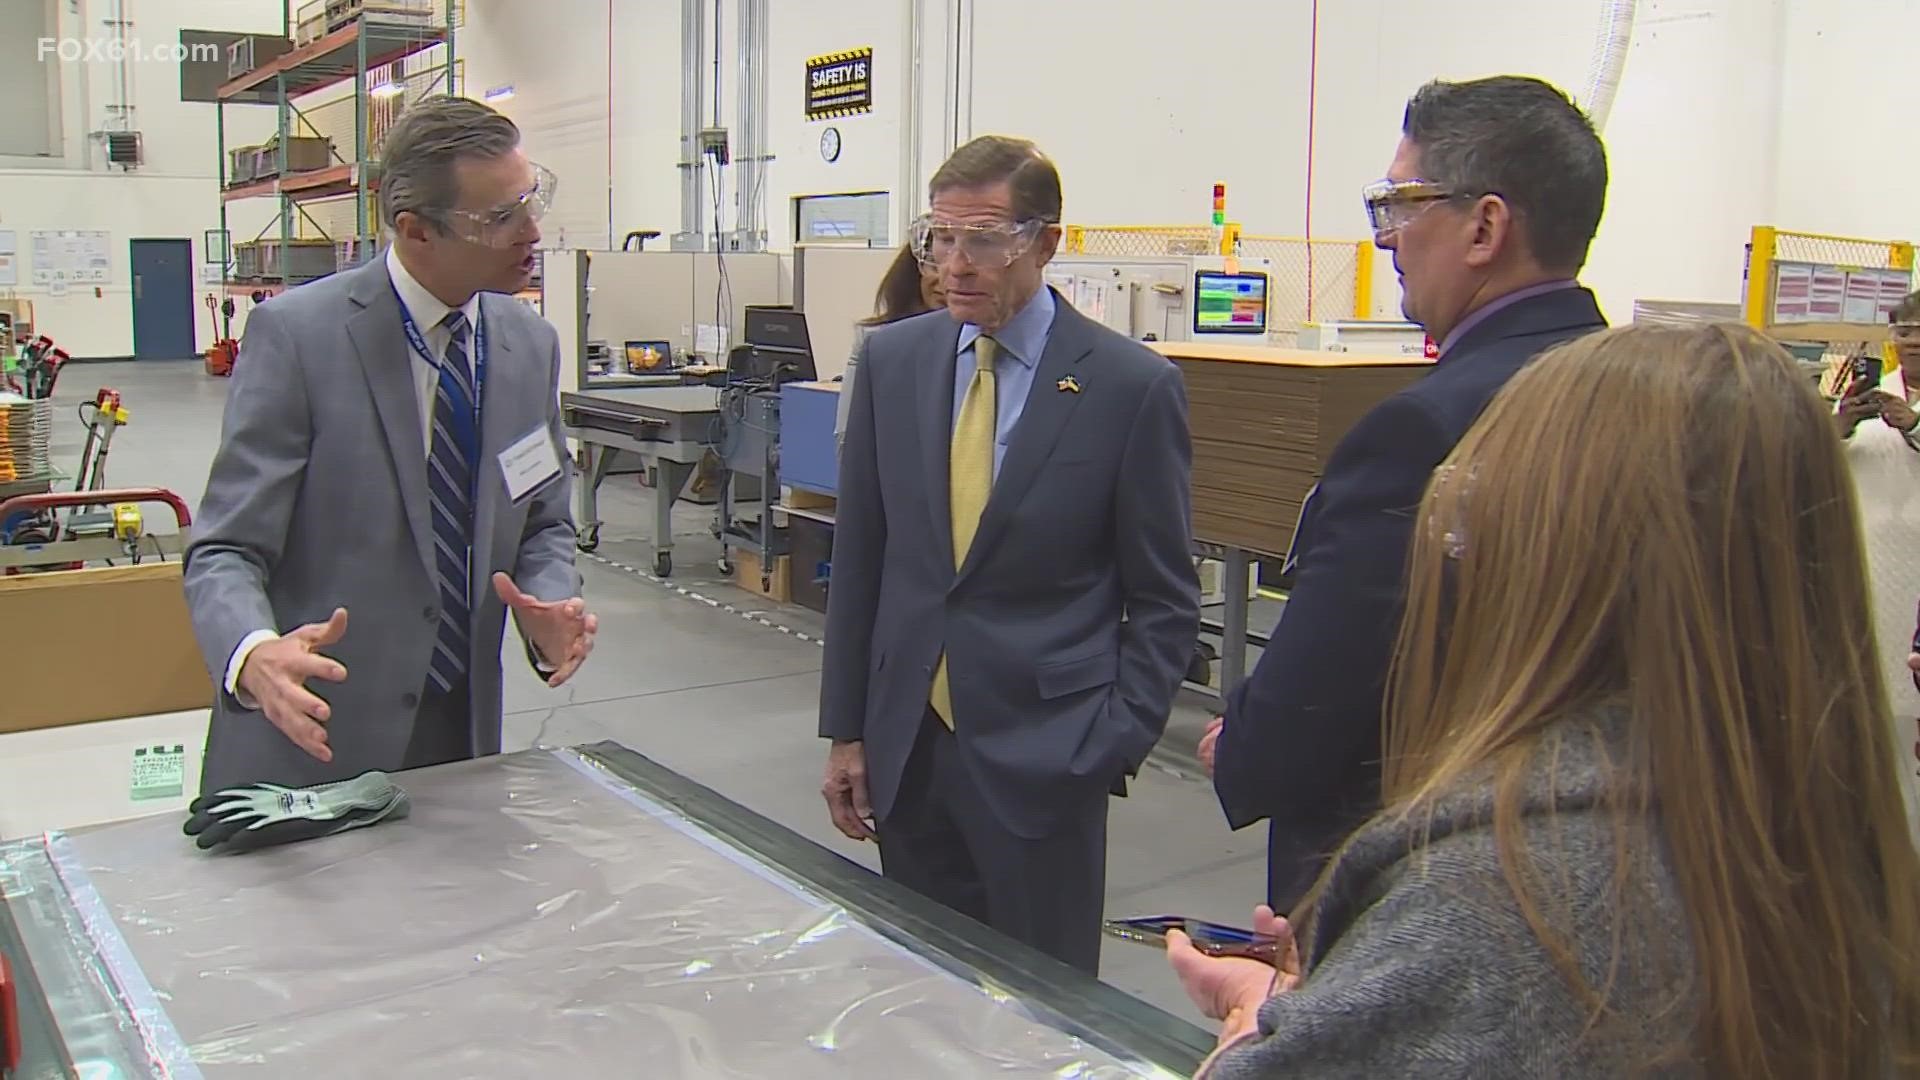 Sen. Richard Blumenthal was quick to state that FuelCell Energy’s technology is greatly needed to aid Ukraine.